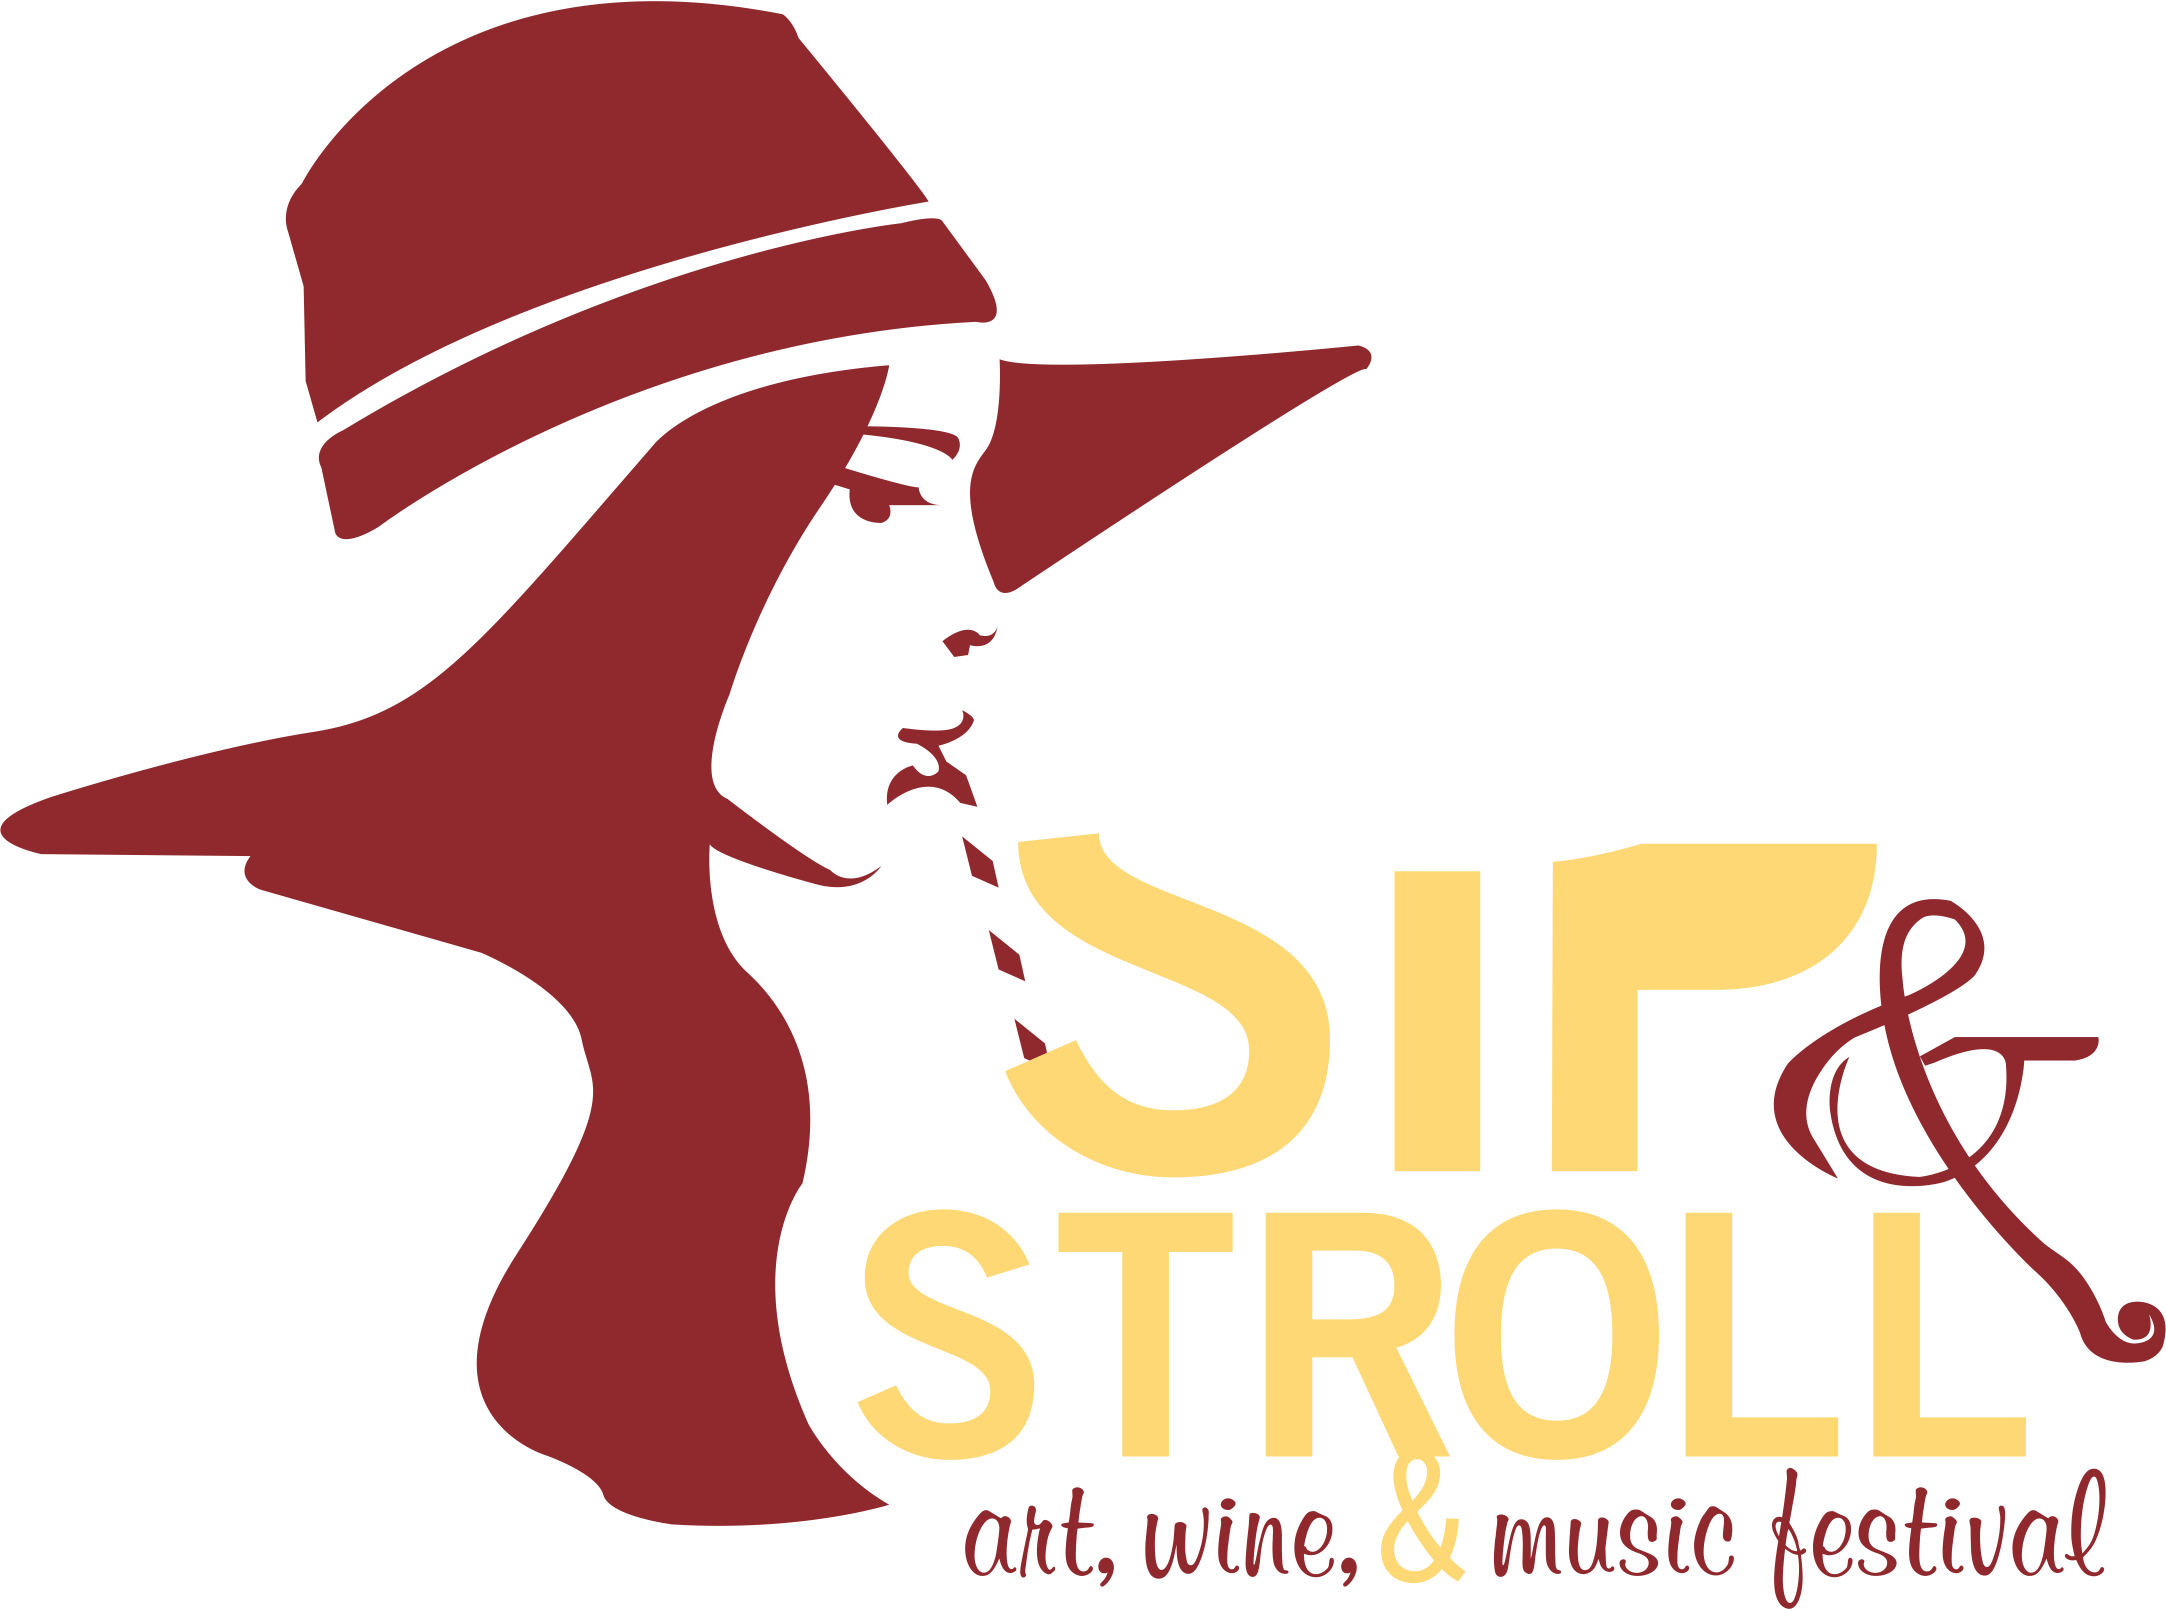 Full House Production's Annual Event, Sip & Stroll, - Graphic Design (2166x1609)